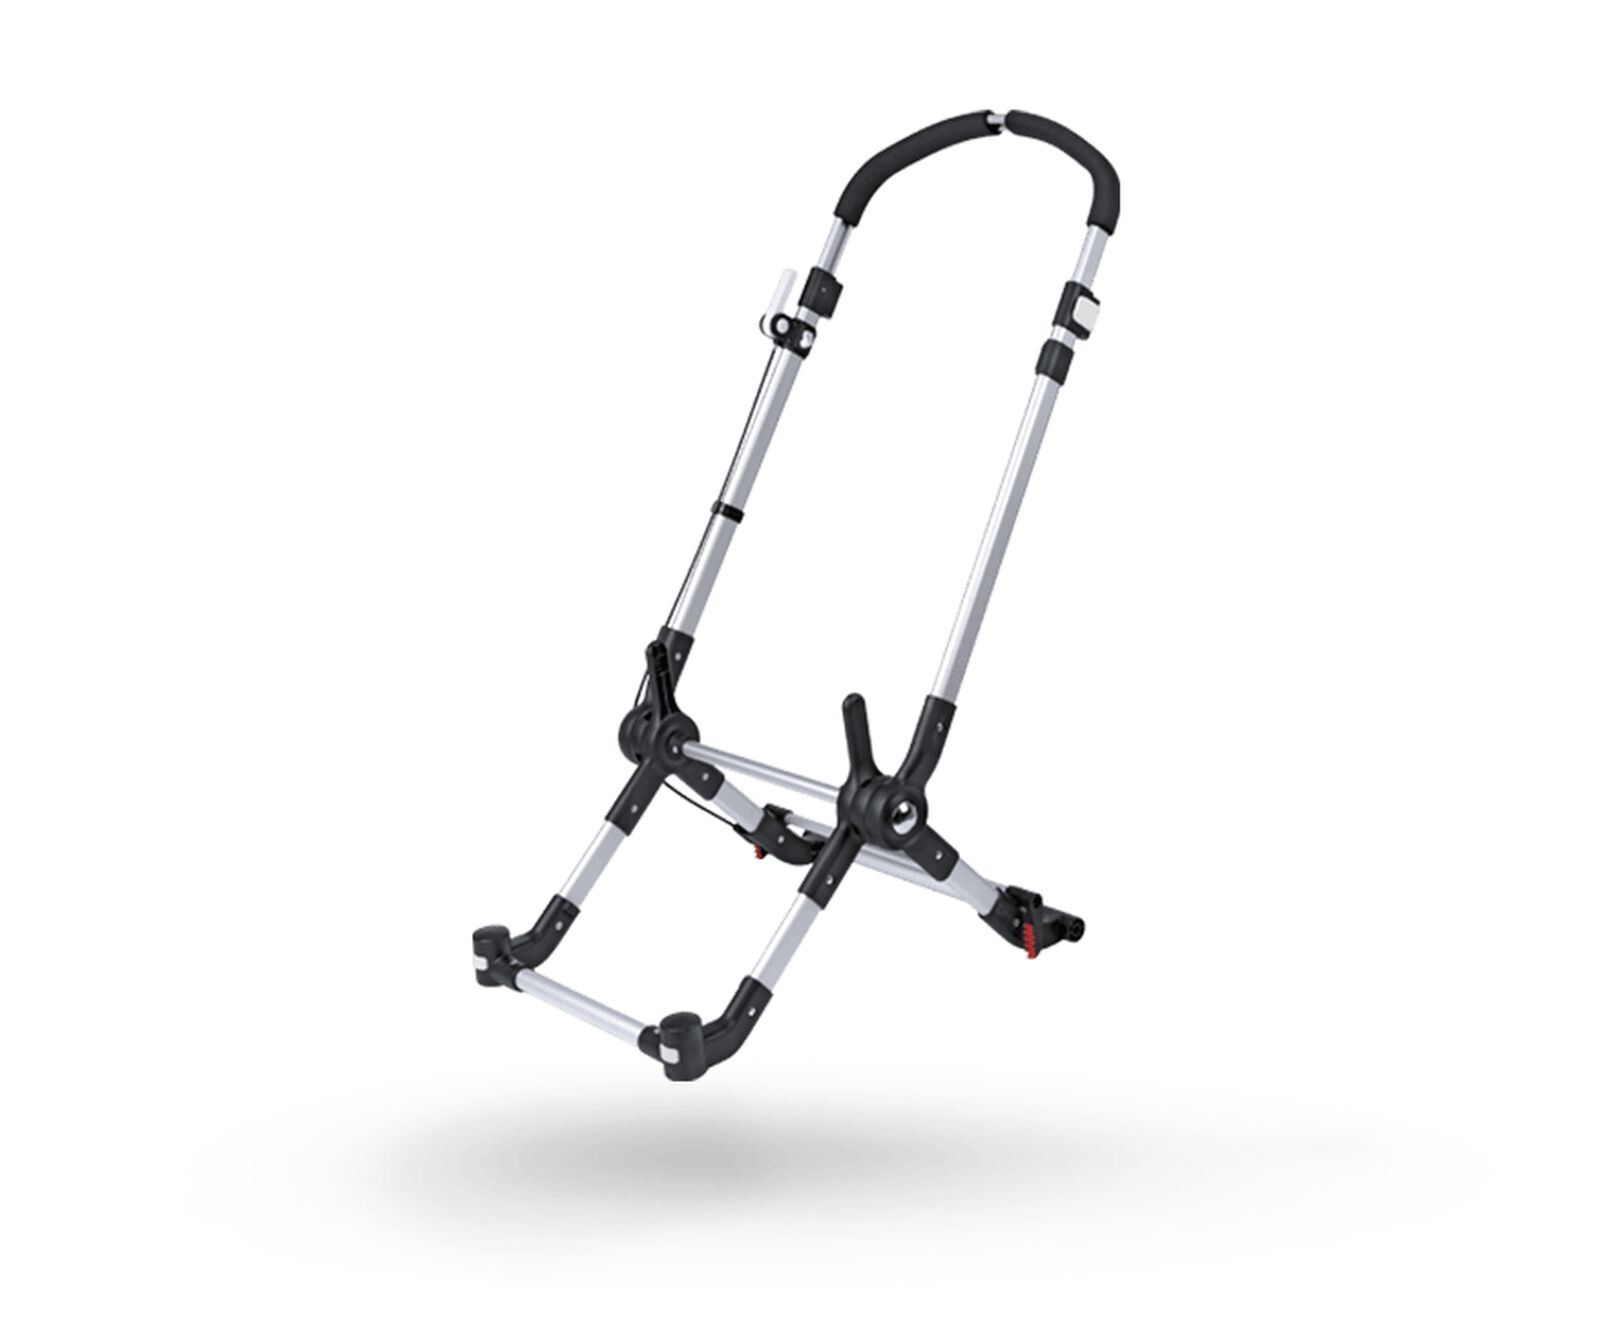 Bugaboo Cameleon 3 chassis